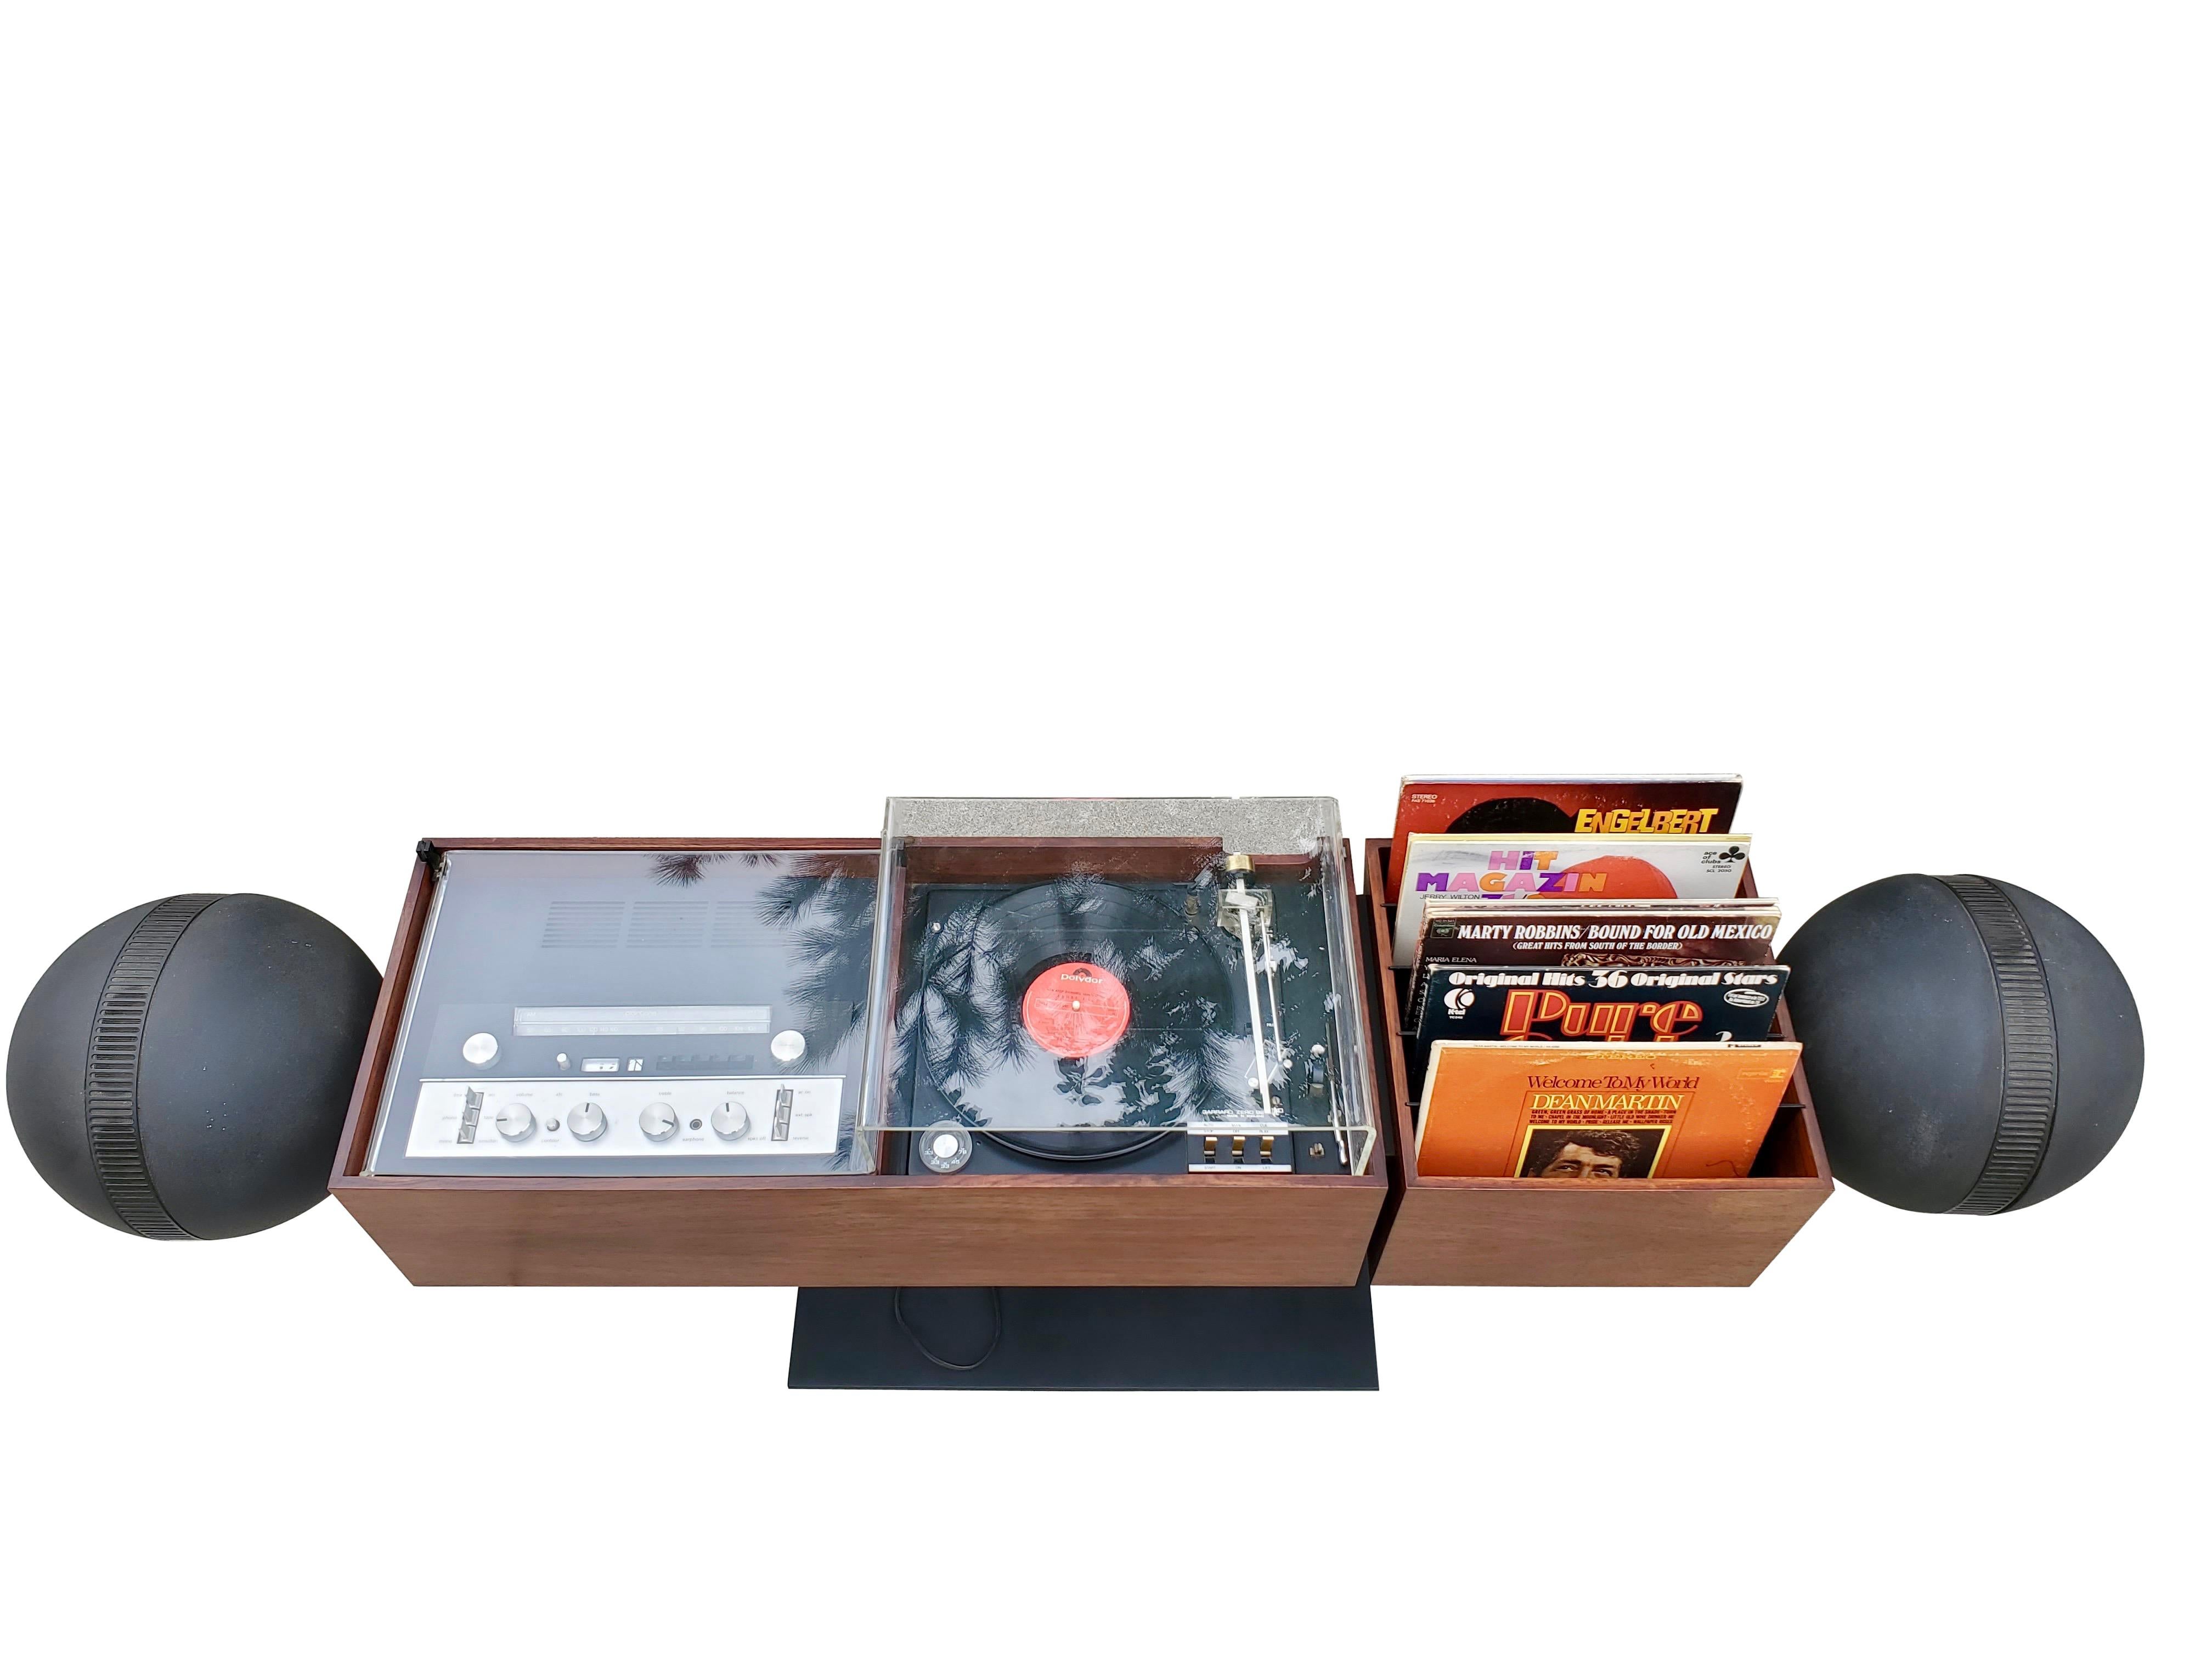 Machine-Made Clairtone Project G2 Series T11 Console Stereo System & Garrard Turntable For Sale